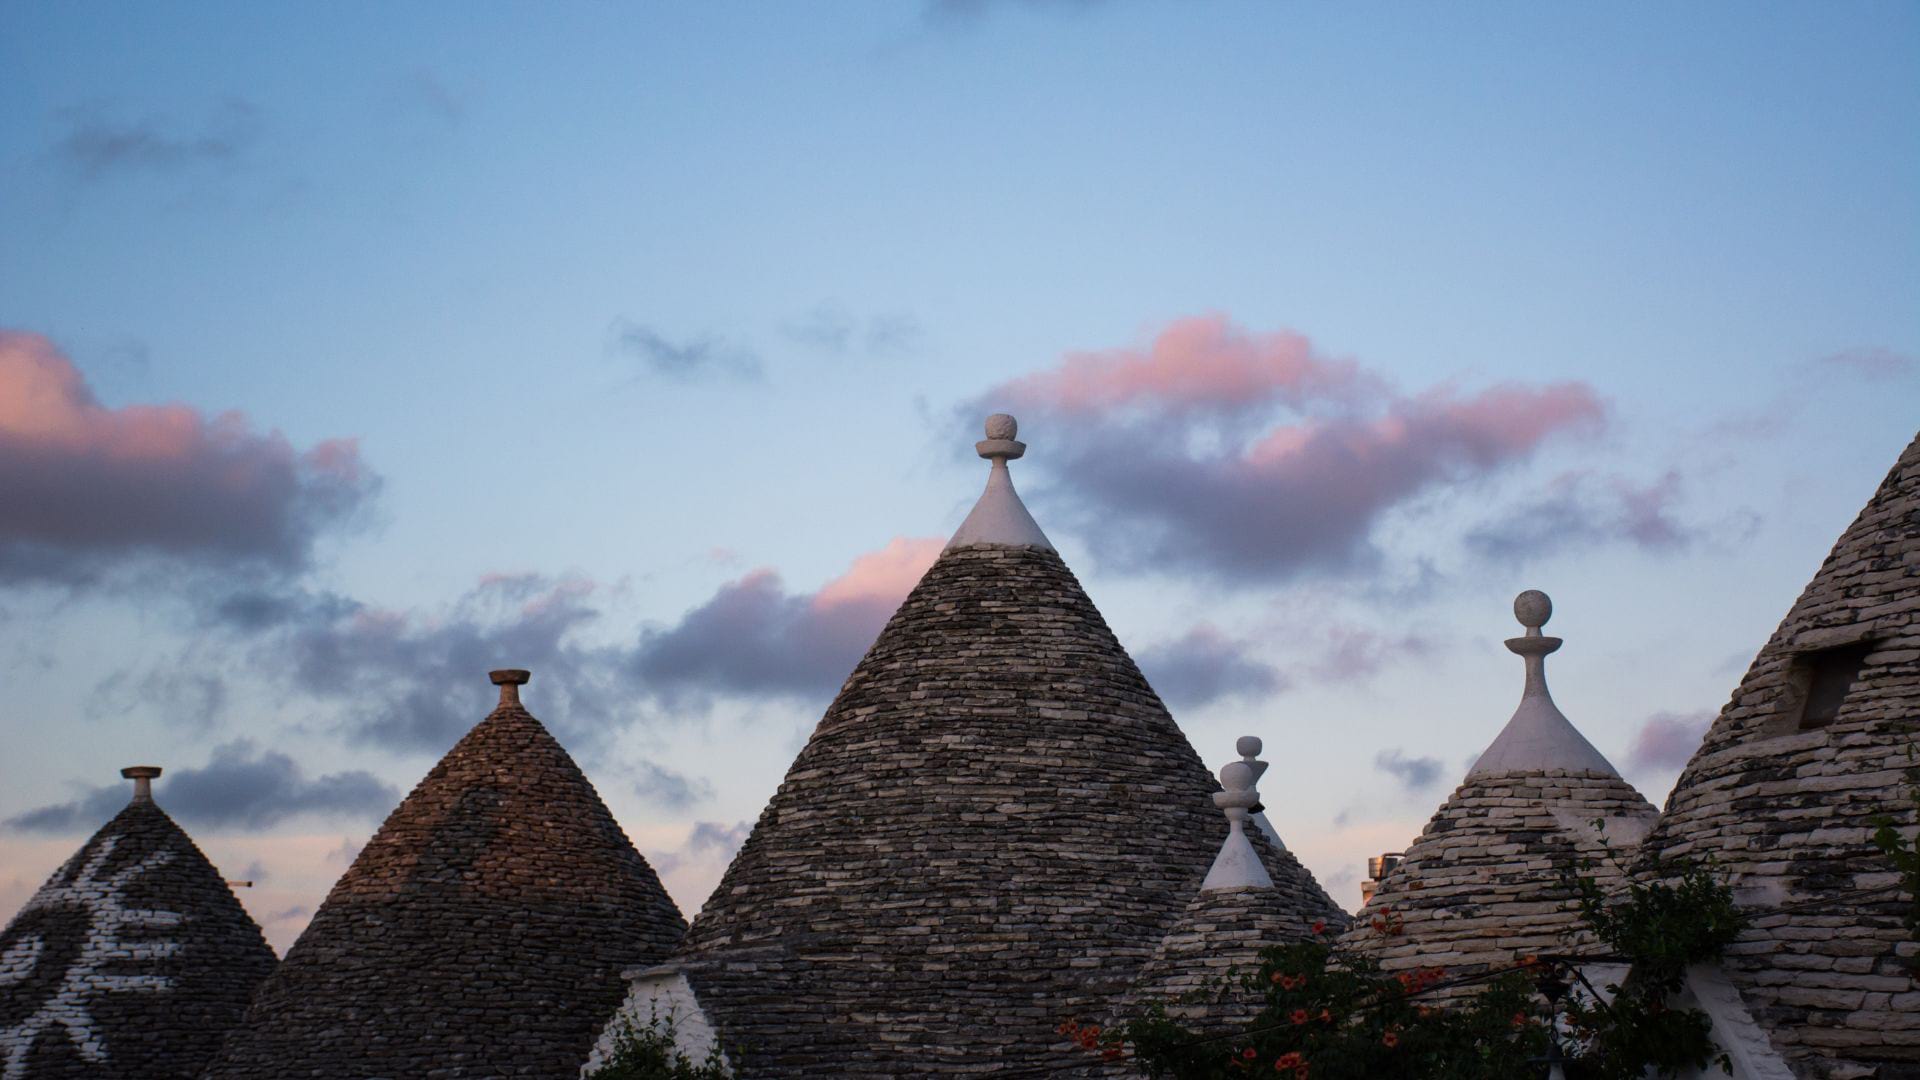 Buying a trullo in Apulia: the real estate dream of VIPs